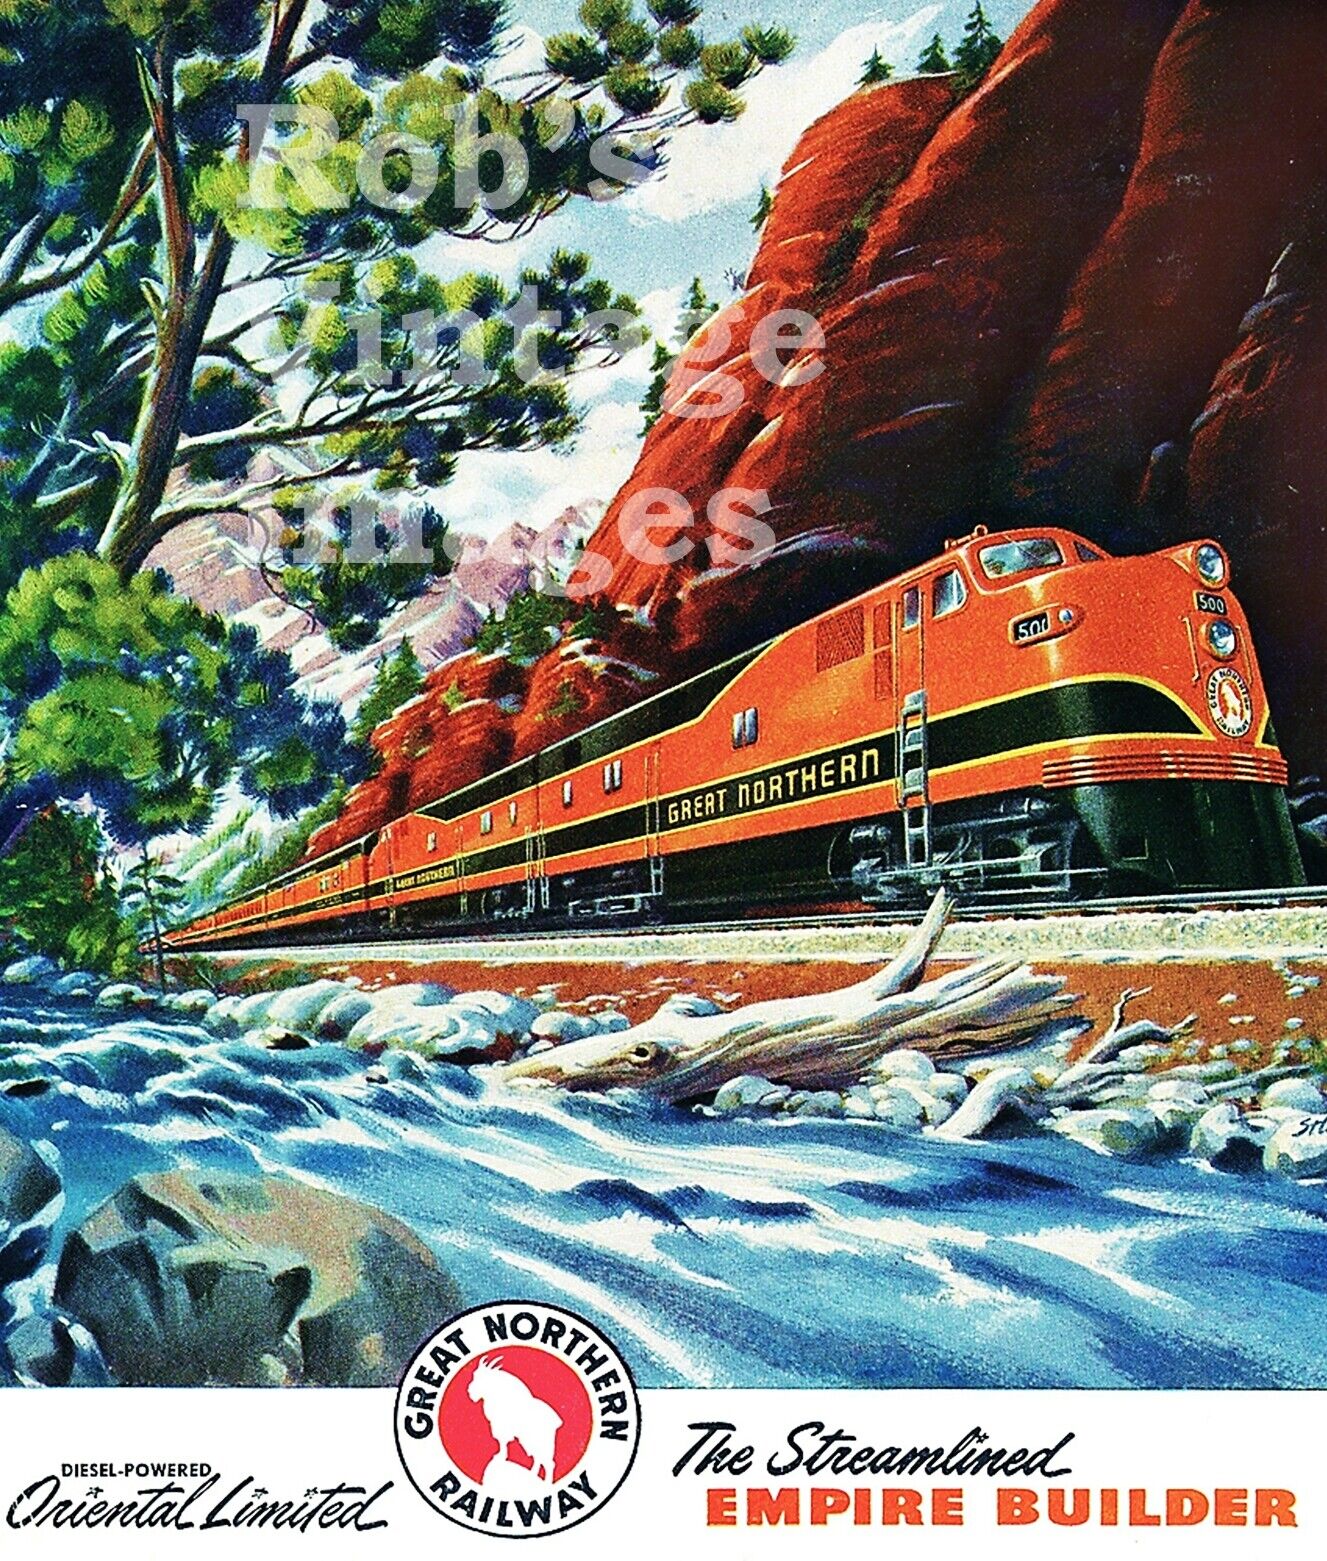 1946 Great Northern Railroad Poster Empire Builder  Oriental Limited Train